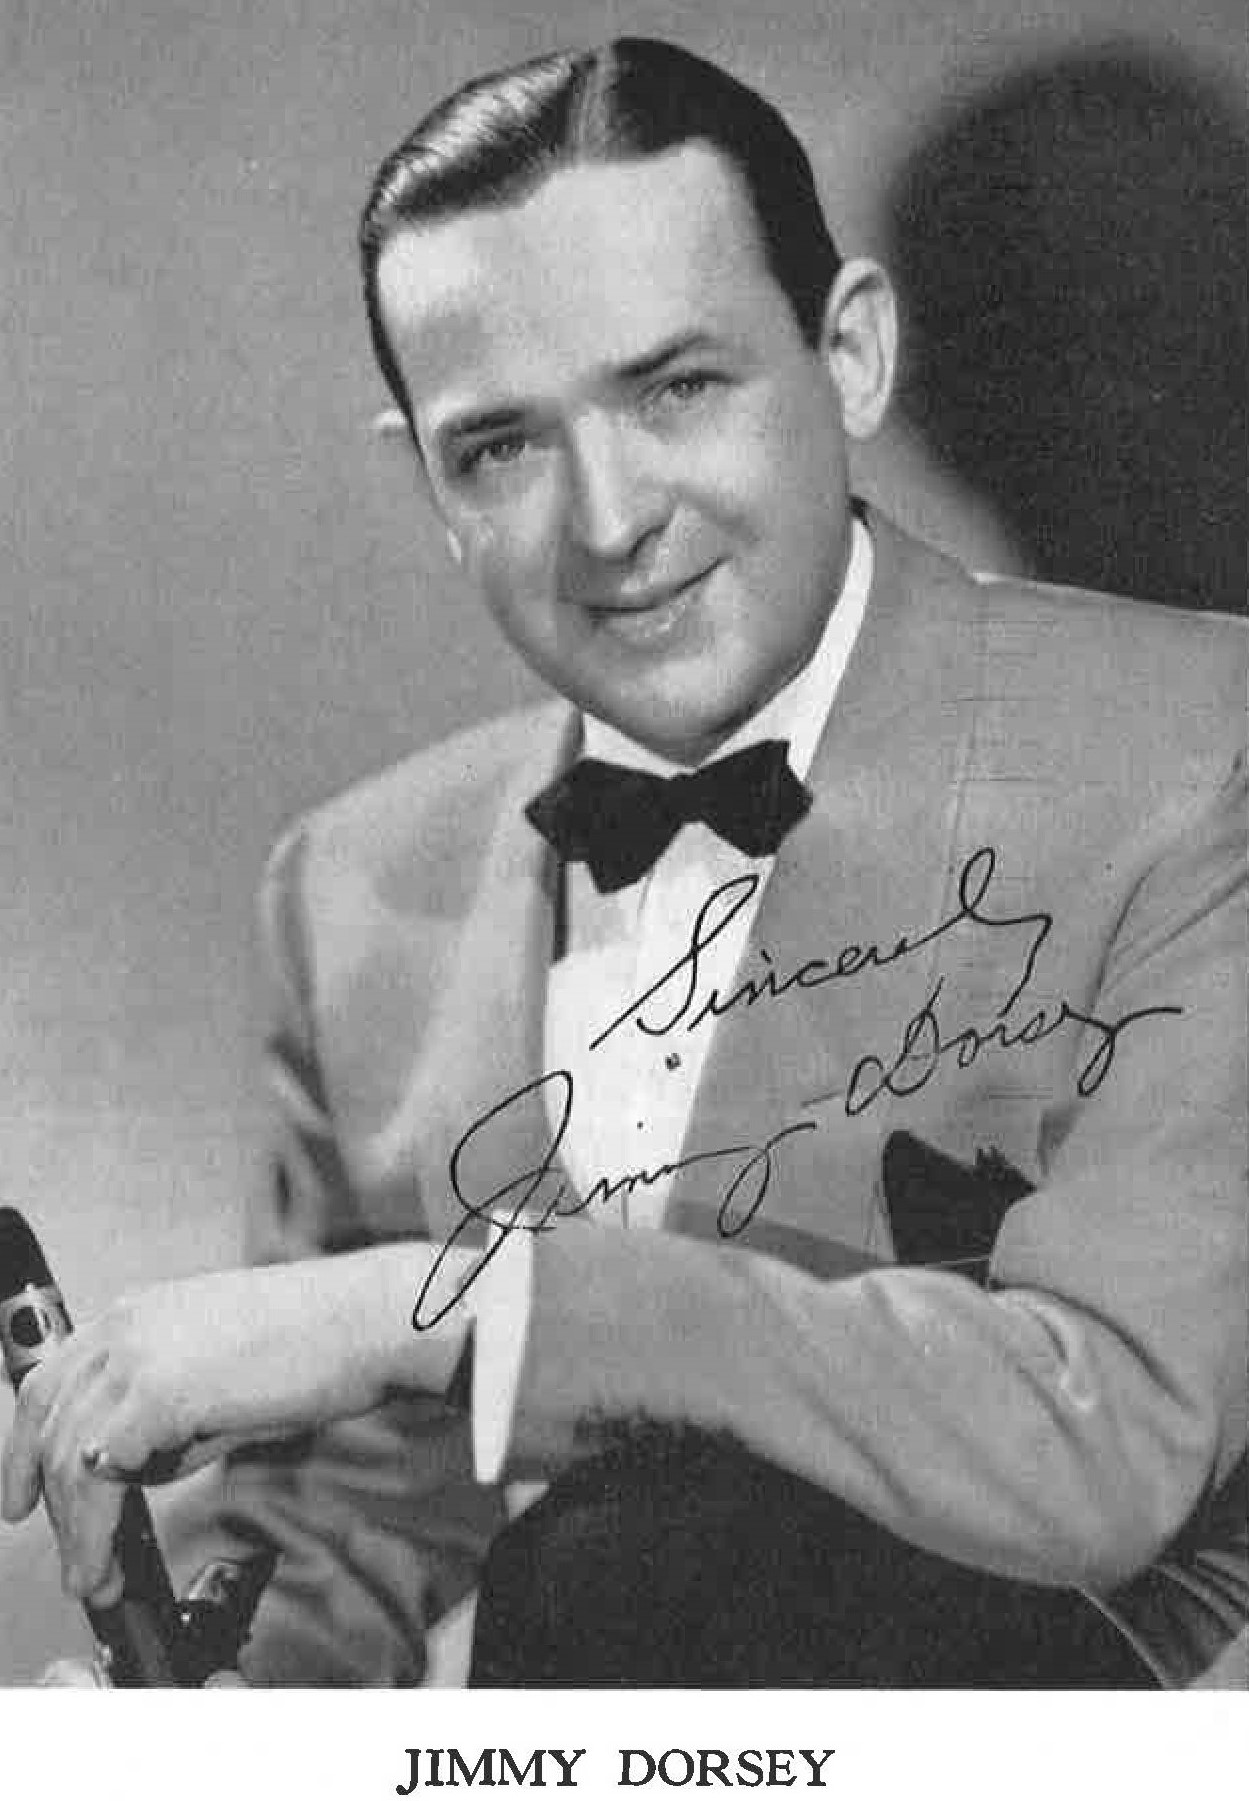 Jimmy Dorsey: Profiles in Jazz - The Syncopated Times